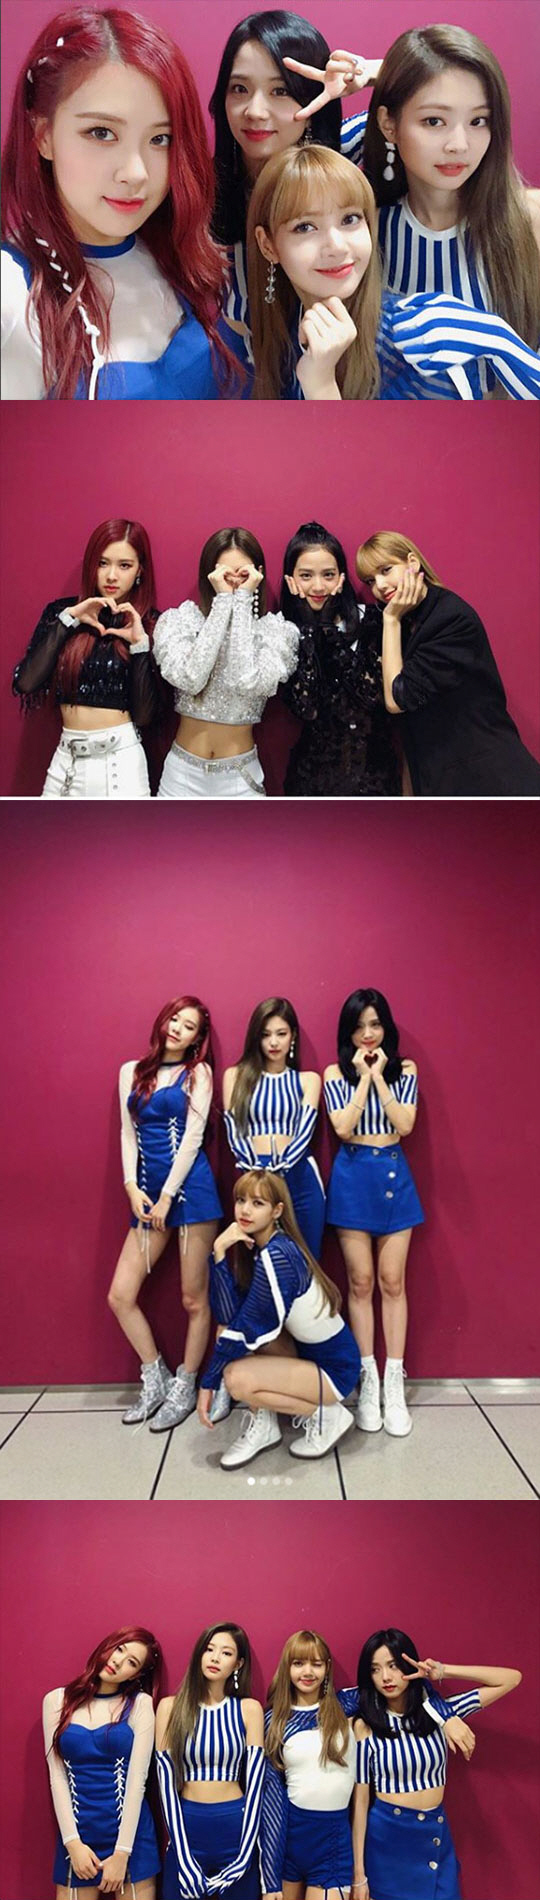 Girl group BLACKPINK revealed the joy and fan love of comeback.BLACKPINK (JiSoo Jenny Kim Rose Lisa) posted several photos on the official SNS on the 17th with the article Blink Ball is hot and hot and it is like fire.In the photo, BLACKPINK members are posing in a cute hand heart and V pose in stage costumes.BLACKPINK showed off its comeback in the past, including the domestic and overseas media forest shortly after the comeback with Tududududu and Forever Young on the 15th, while the official MV of Tudududududu exceeded 20 million views in just 13 hours and set the shortest record in the girl group.BLACKPINK will appear on SBS Inkigayo today (17th) and on JTBC Idol room on 23rd.